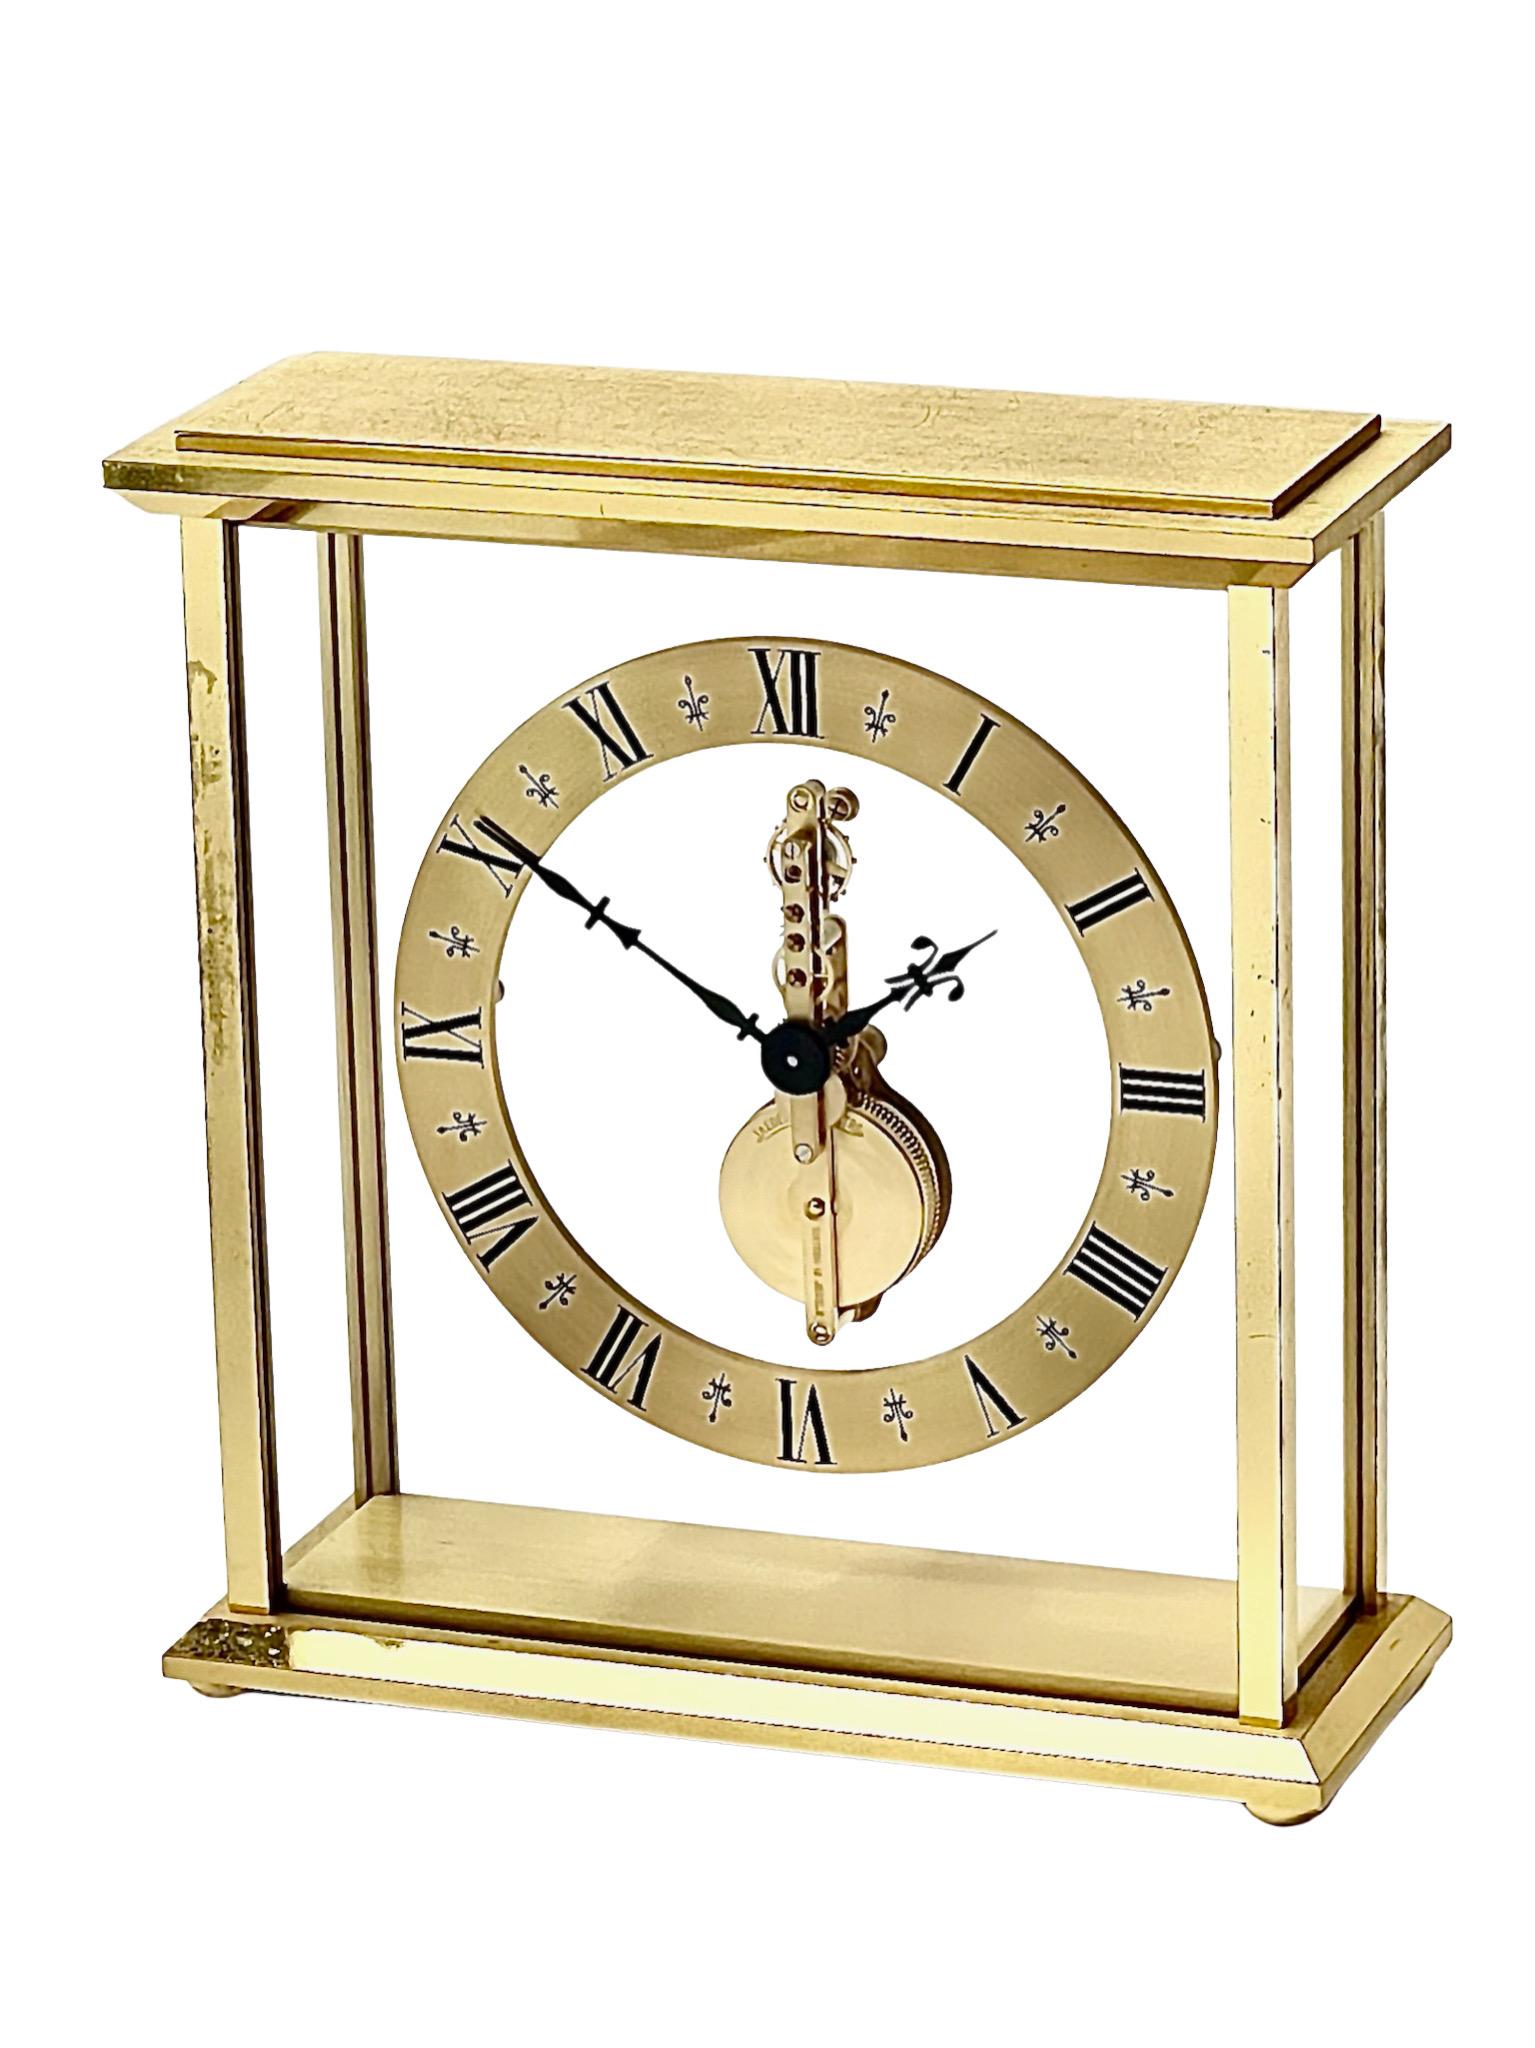 A beautiful brass and glass mantel clock by Jaeger LeCoultre, with a floating Baguette movement set in a rectangular glass and polished brass case. The gilt brass case has stylish bevelled edges and the original gilding is bright and clean.

The